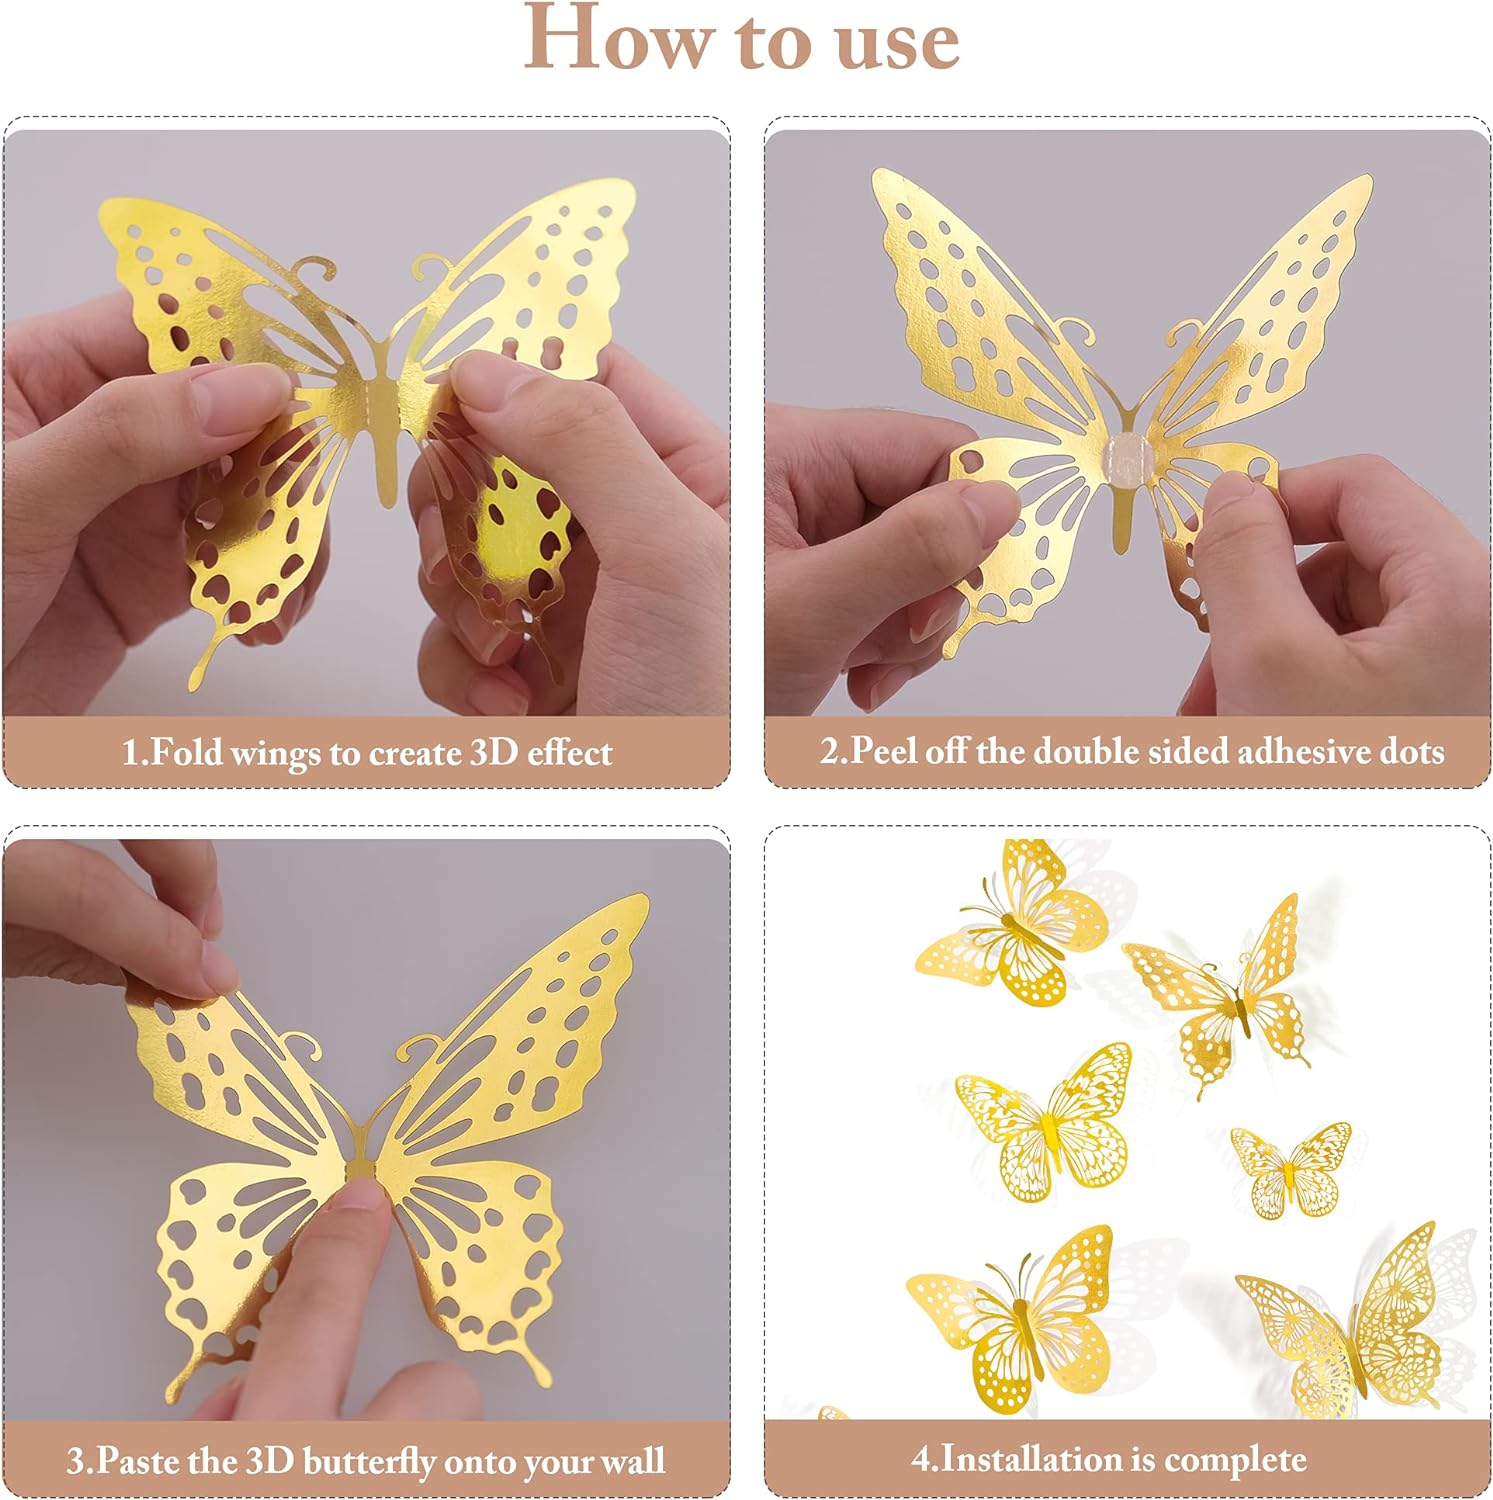 SAOROPEB 3D Butterfly Wall Decor 48 Pcs 4 Styles 3 Sizes, Gold Butterfly Decorations for Butterfly Birthday Decorations Butterfly Party Decorations Cake Decorations, Removable Stickers (Gold)